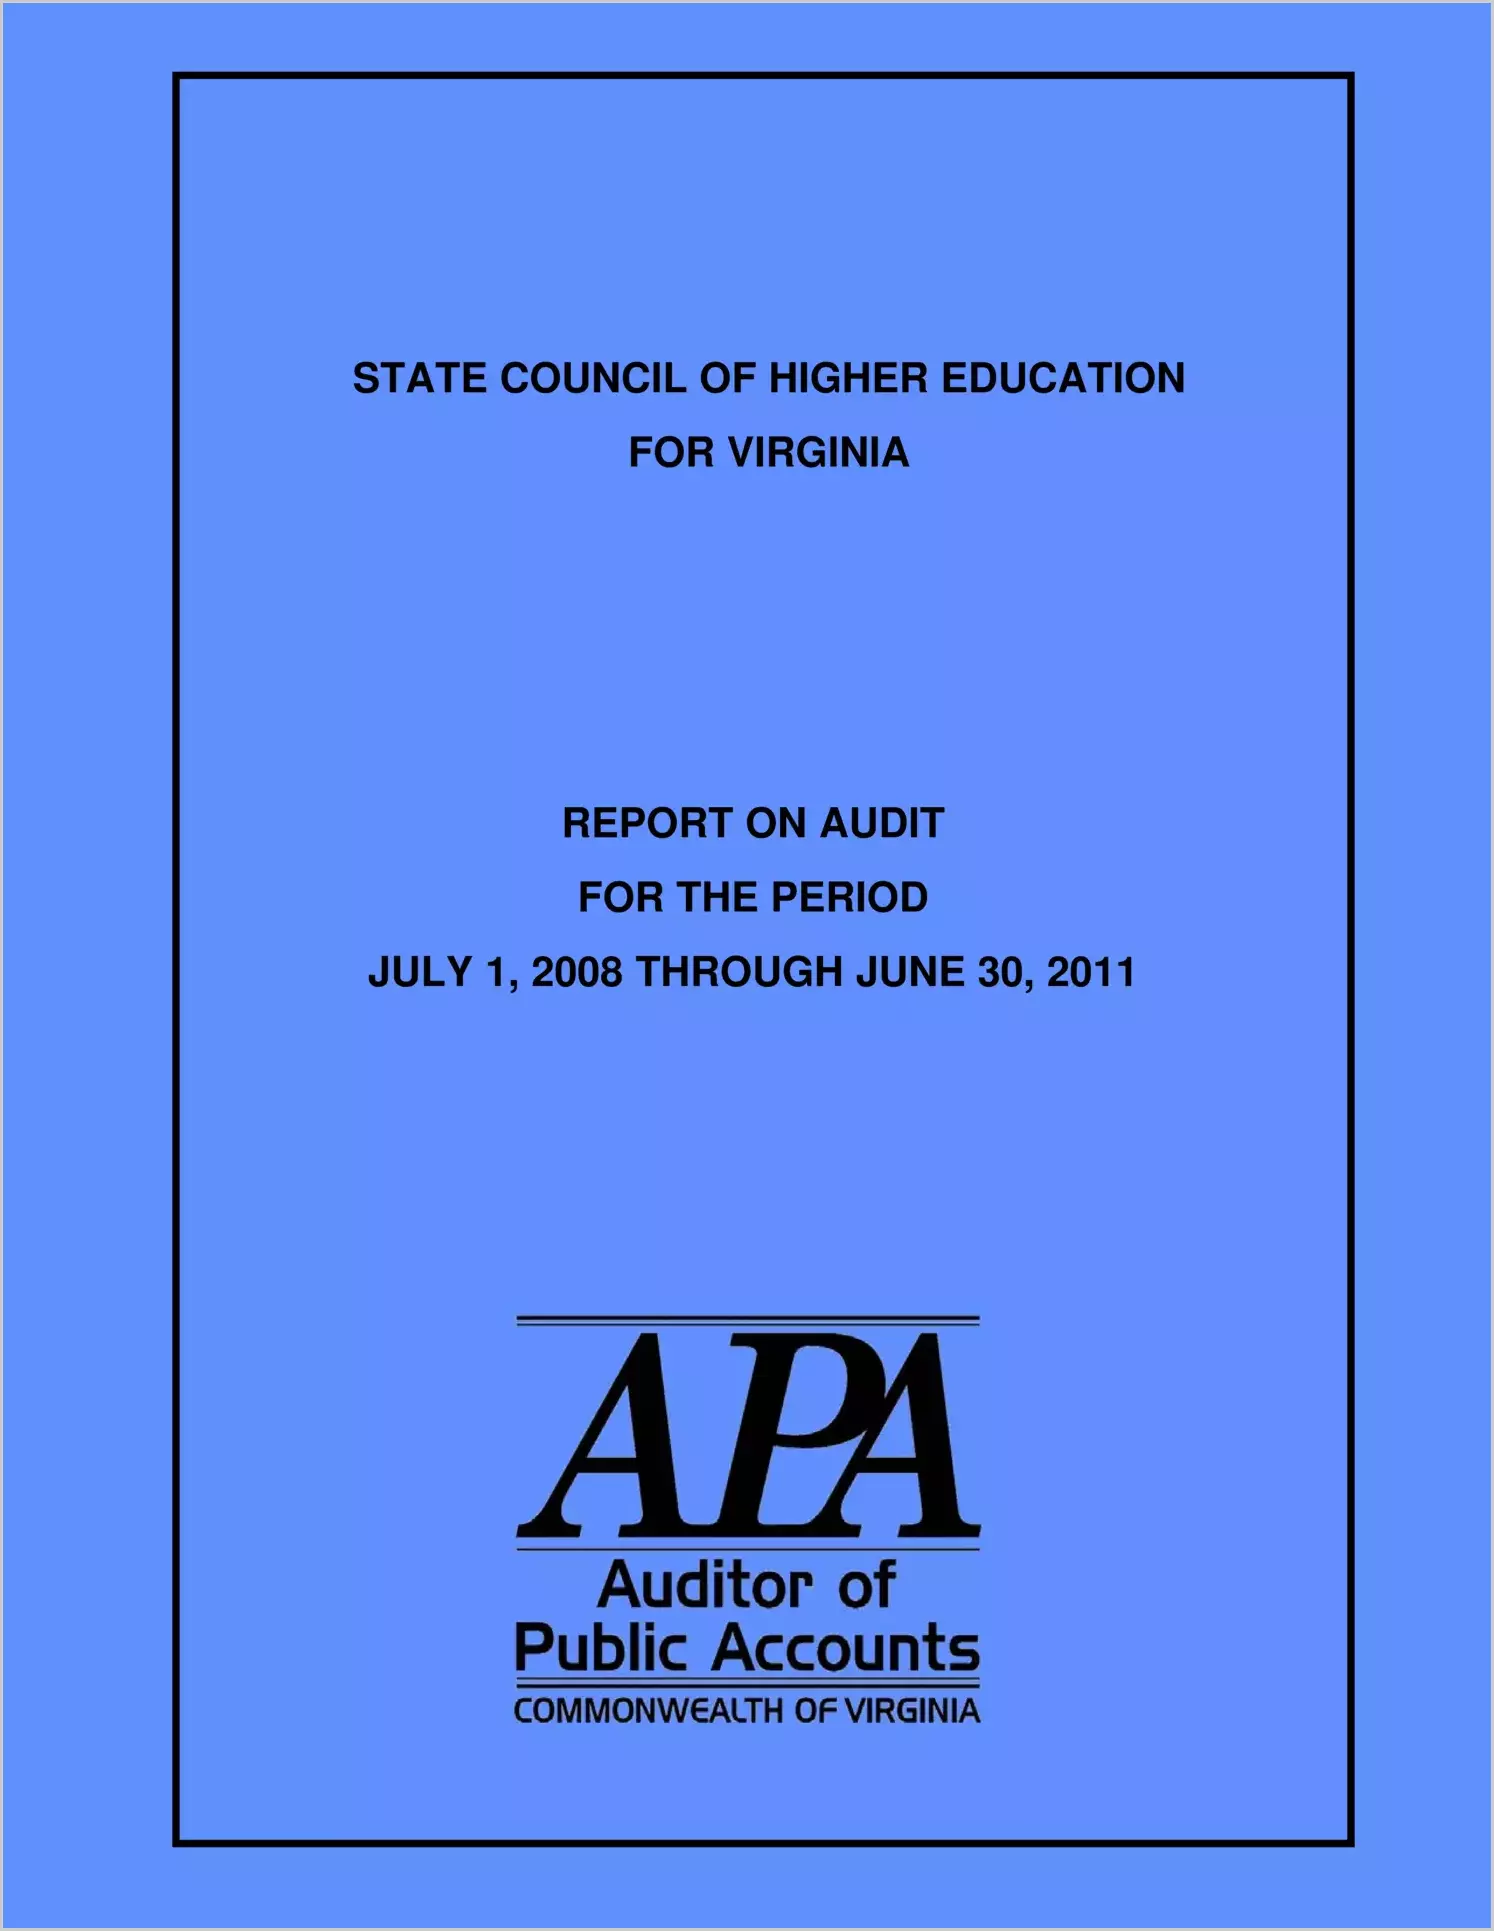 State Council of Higher Education for Virginia for the period July 1, 2008 through June 30, 2011